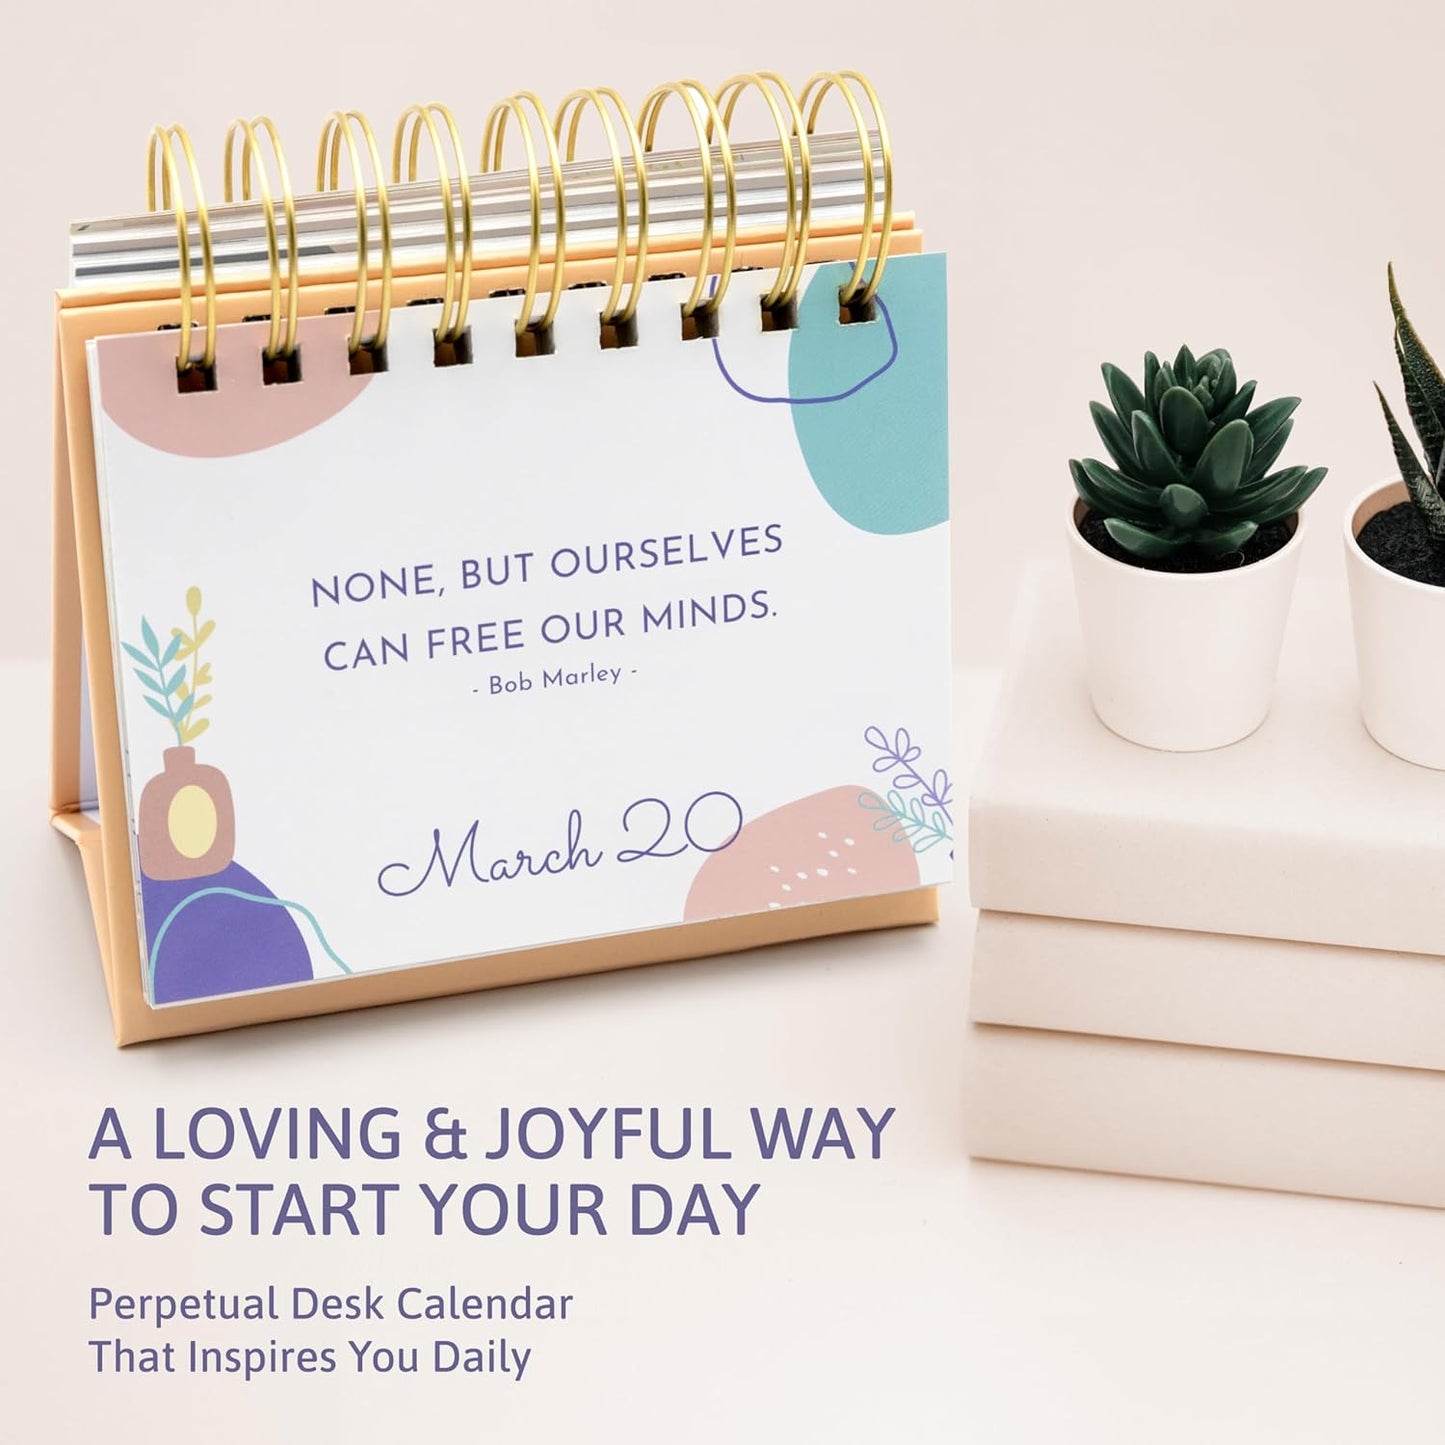 Motivational Desk Calendar - Perpetual Daily Flip Calendar with Daily Motivational Quotes for Desk - Inspirational Gifts for Women, Gifts for Coworkers Female, Inspirational Desk Decor